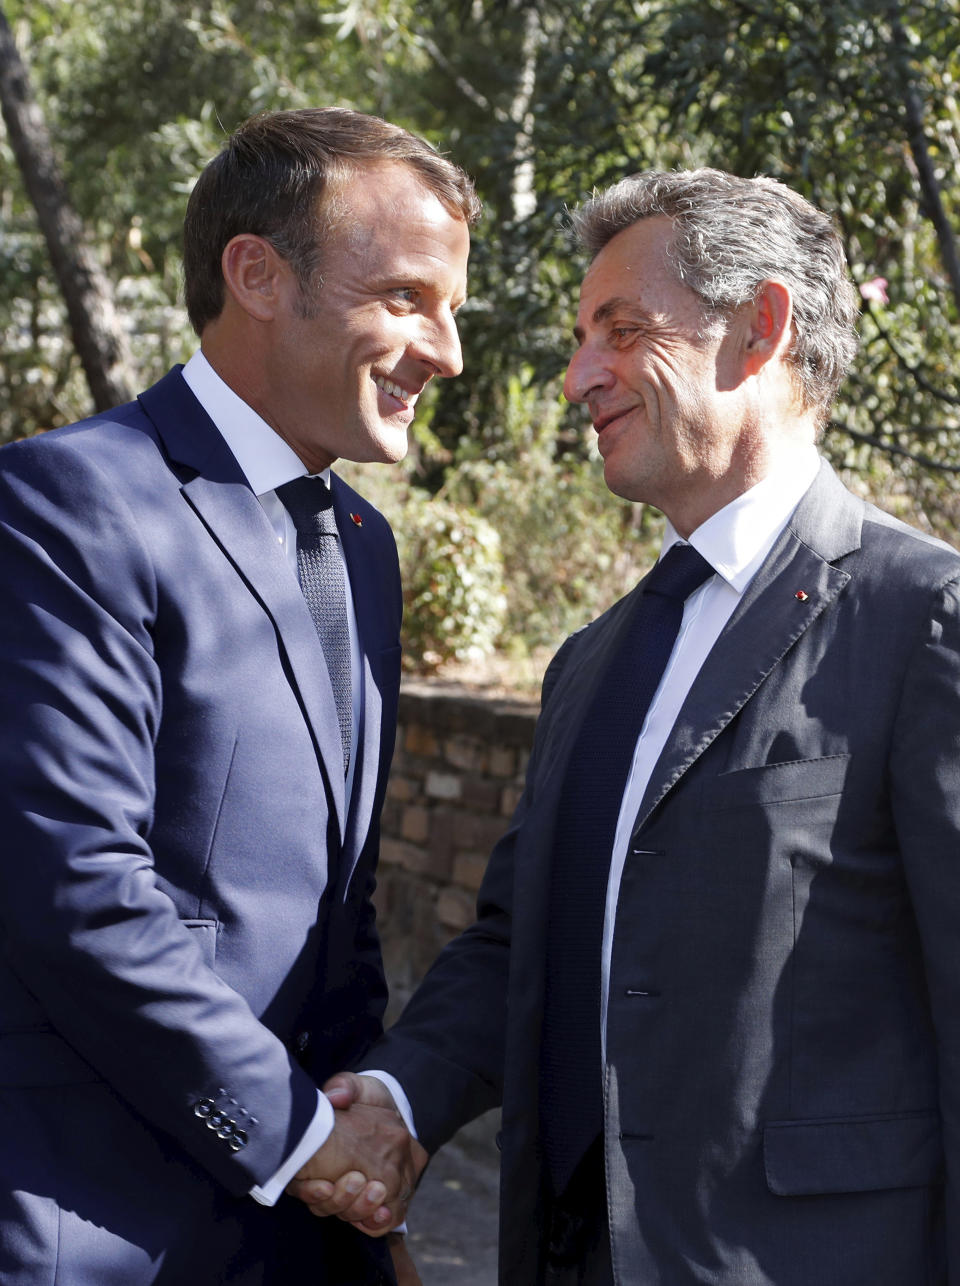 French President Emmanuel Macron, left, meets former French President Nicolas Sarkozy during a ceremony marking the 75th anniversary of the WWII Allied landings in Provence, in Saint-Raphael, southern France, Thursday, Aug. 15, 2019. Starting on Aug. 15, 1944, French and American troops — 350,000 in total — landed on the French Riviera. U.S. forces drove north while French troops — many from French colonies in Africa — moved along the coast to secure key ports. (Eric Gaillard/POOL via AP)